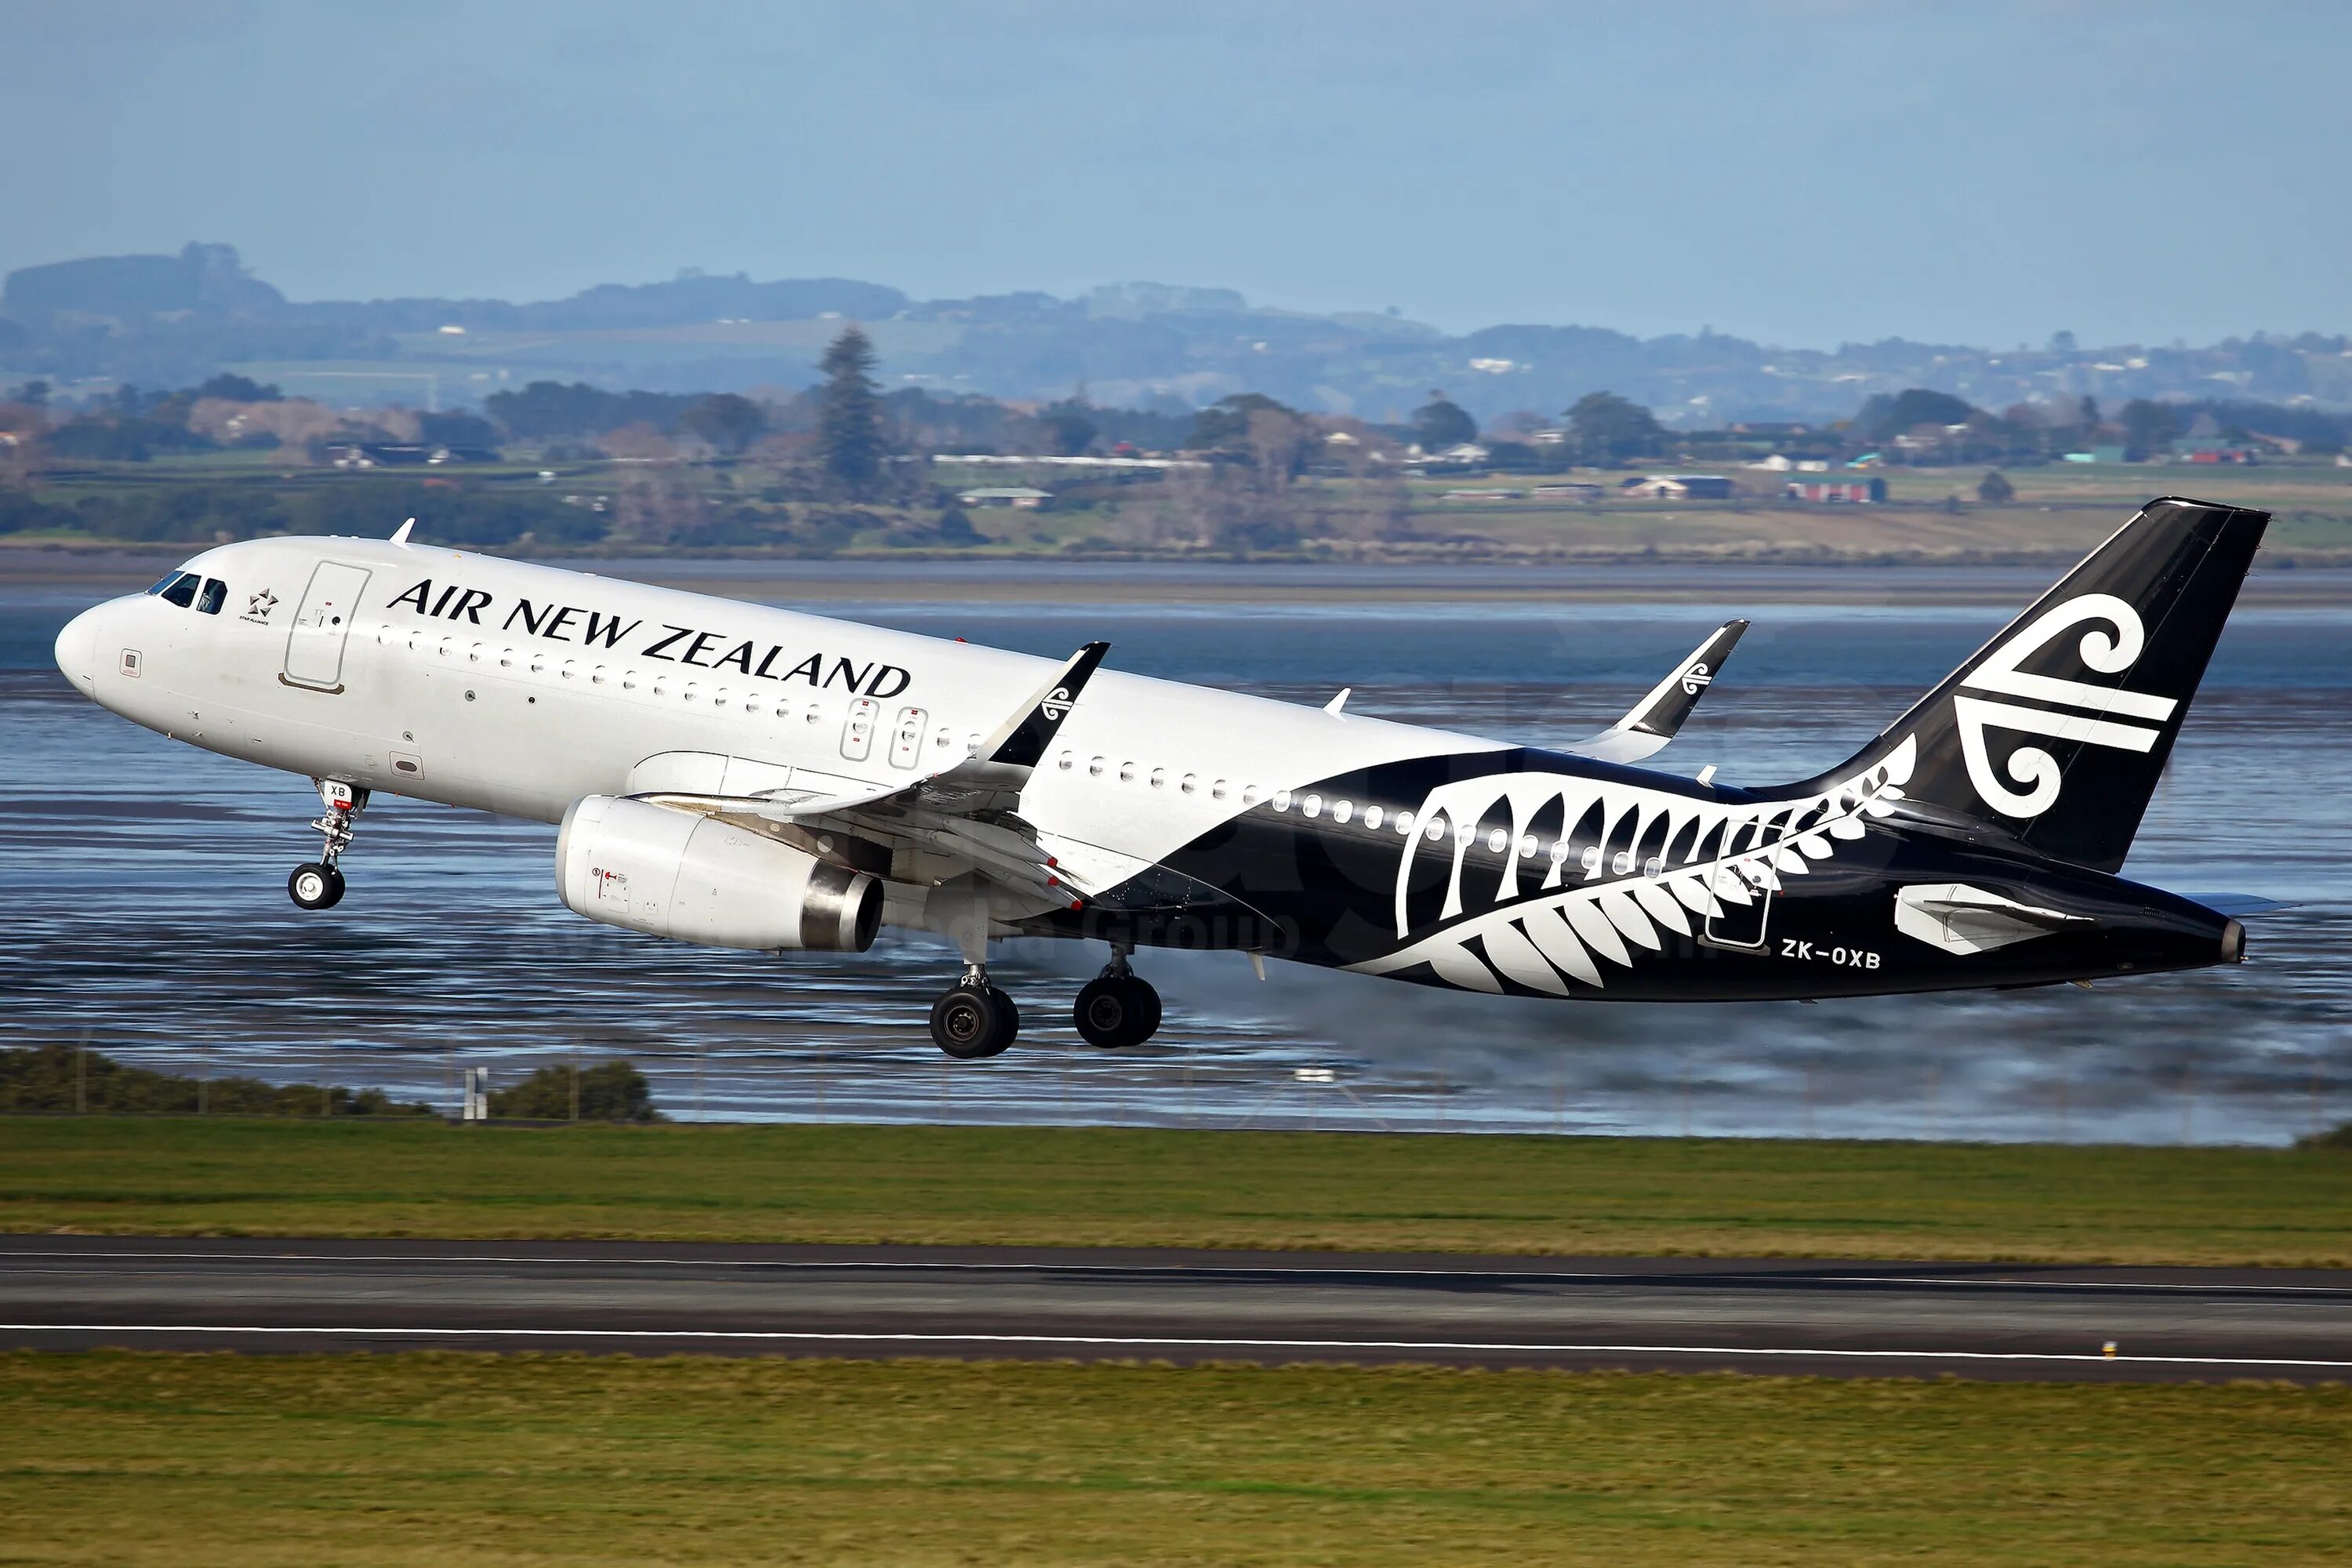 A320neo Air New Zealand. Airbus a320 Air New Zealand. A320 Air Zeland. Air New Zealand Эйрбас а320.